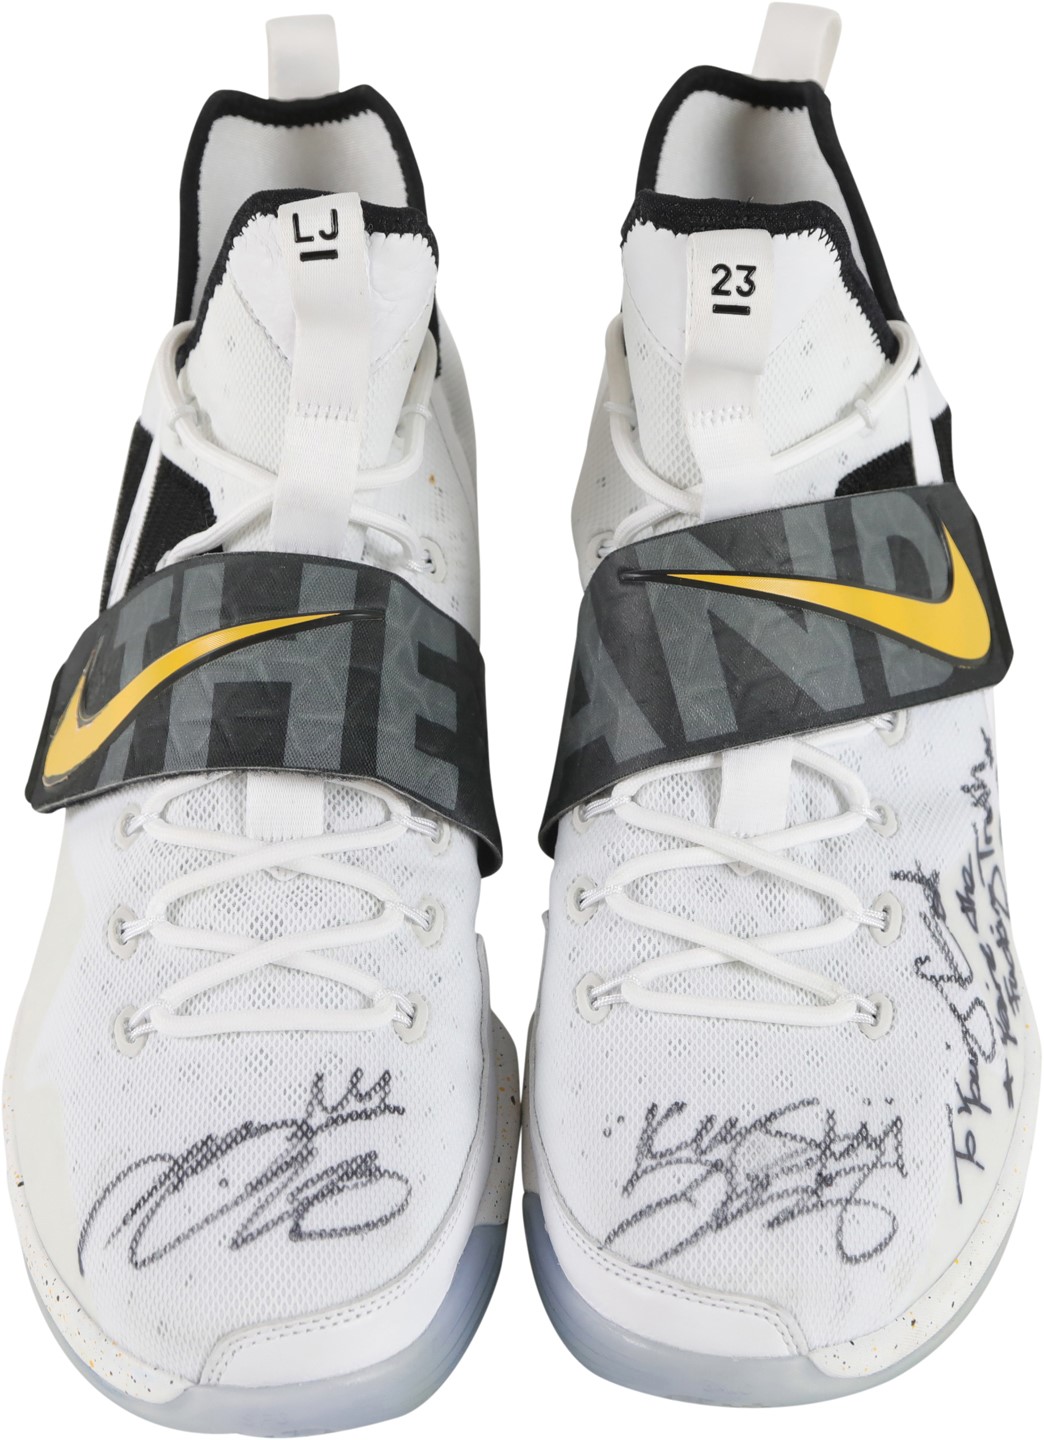 Won this game worn LeBron James shoe from work. Wondering about possible  value. : r/SportsMemorabilia